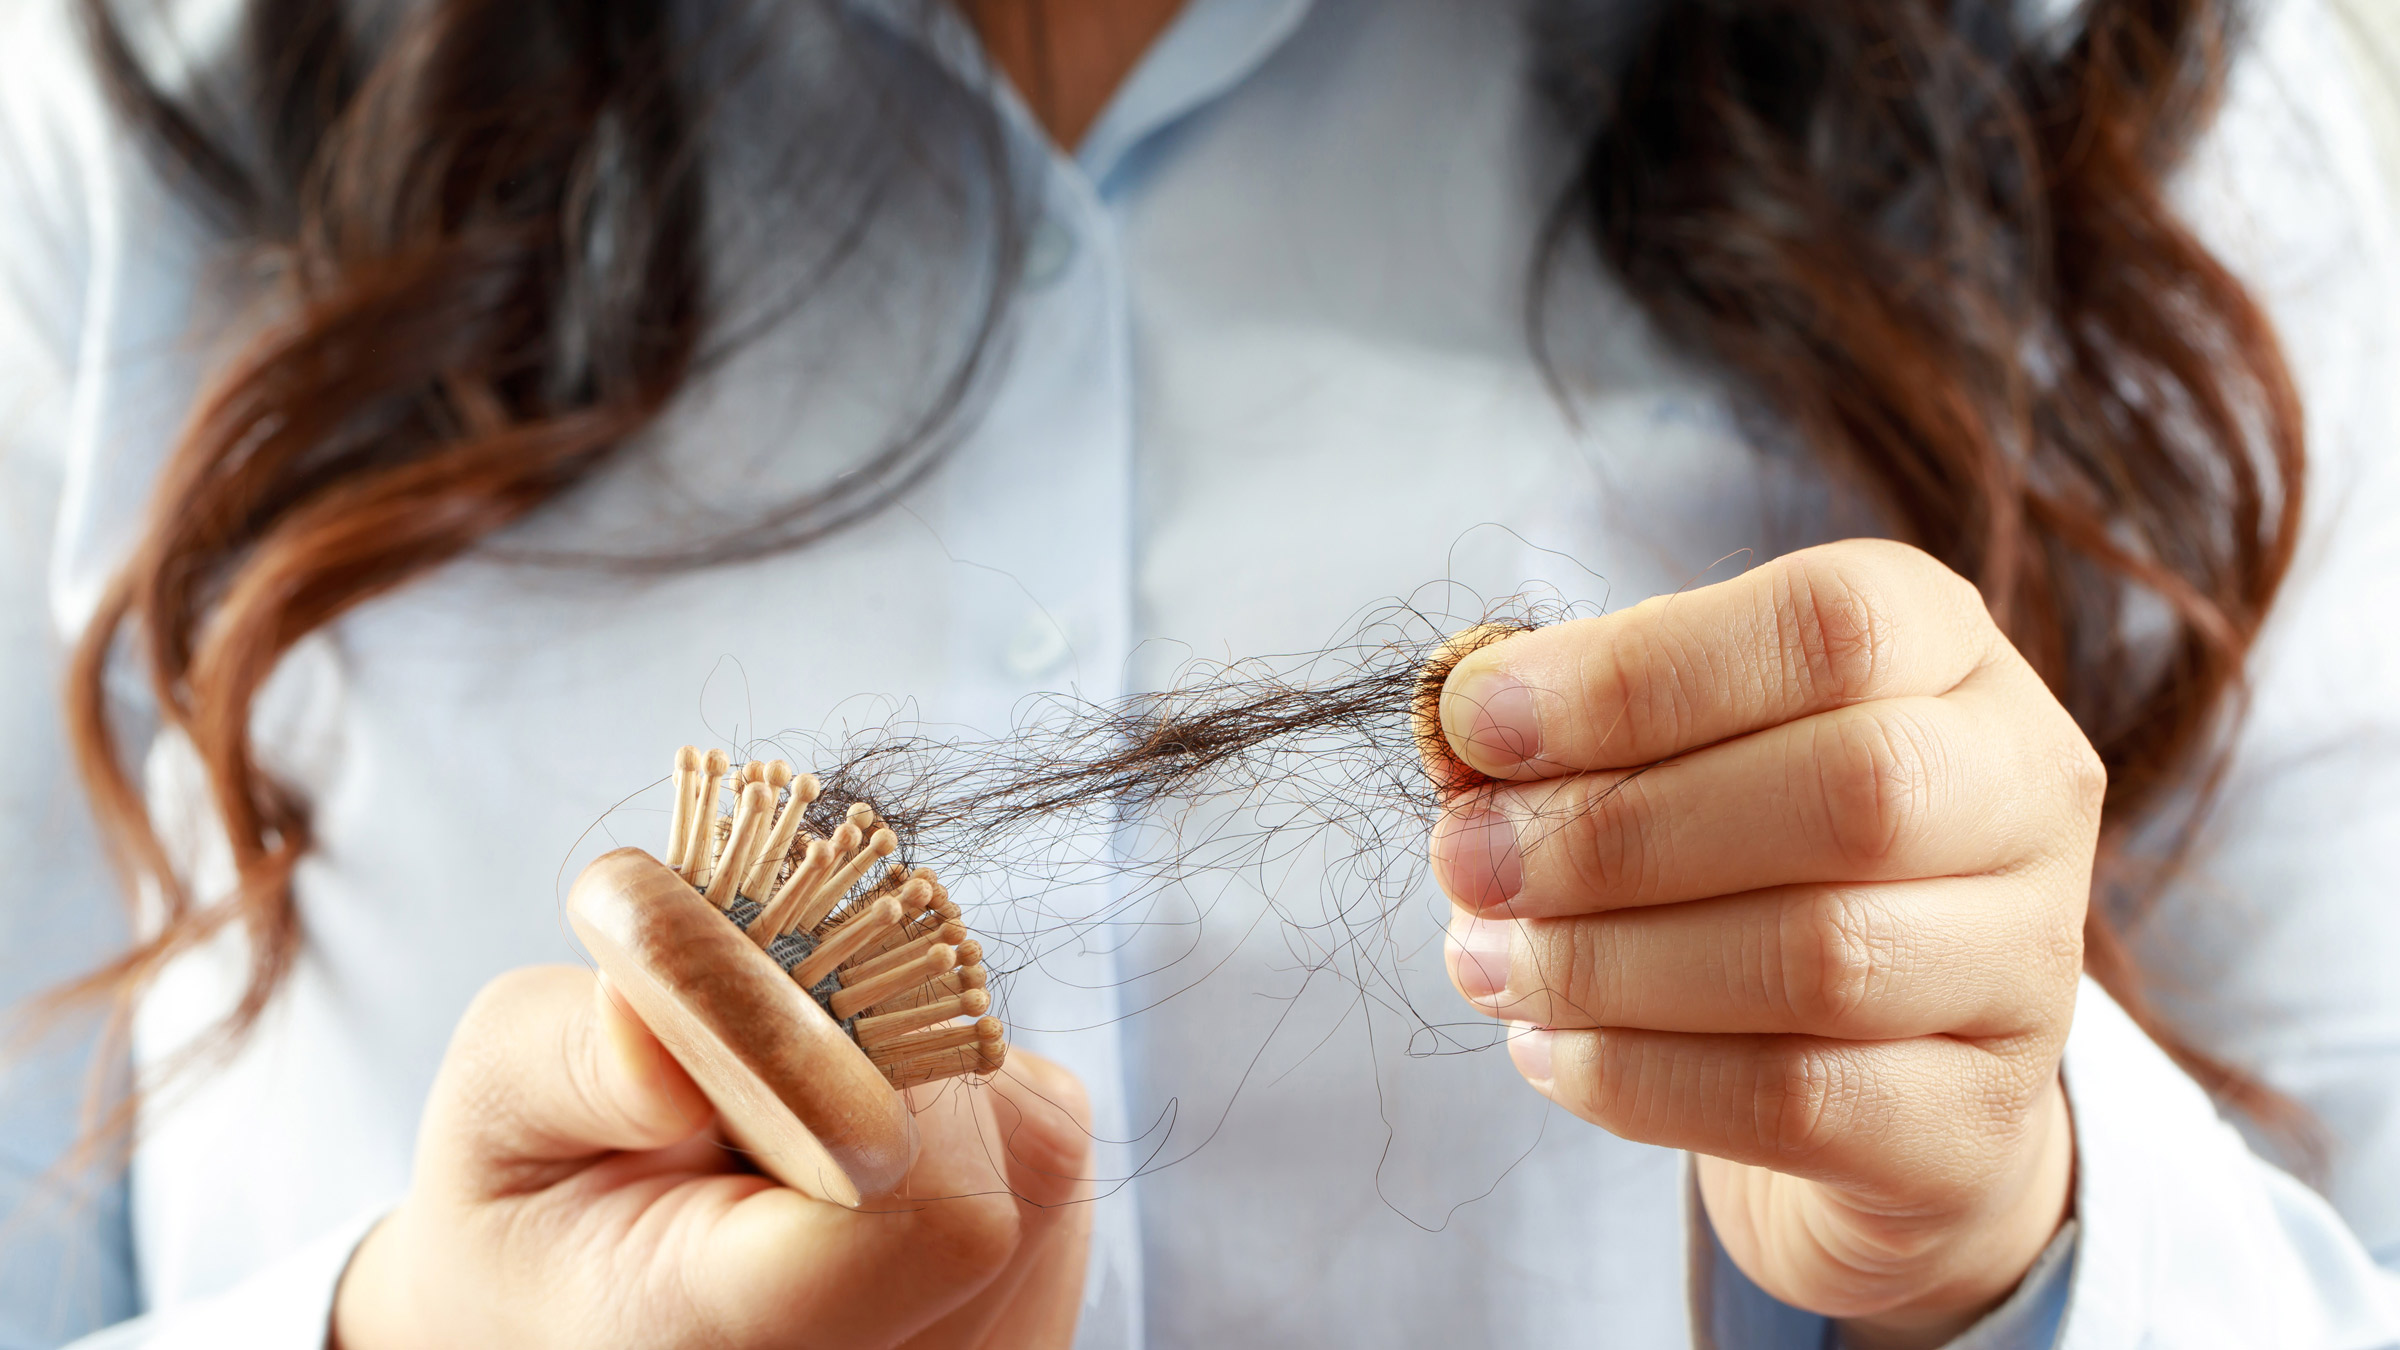 What Causes Hair Loss? 10 Common Culprits - GoodRx